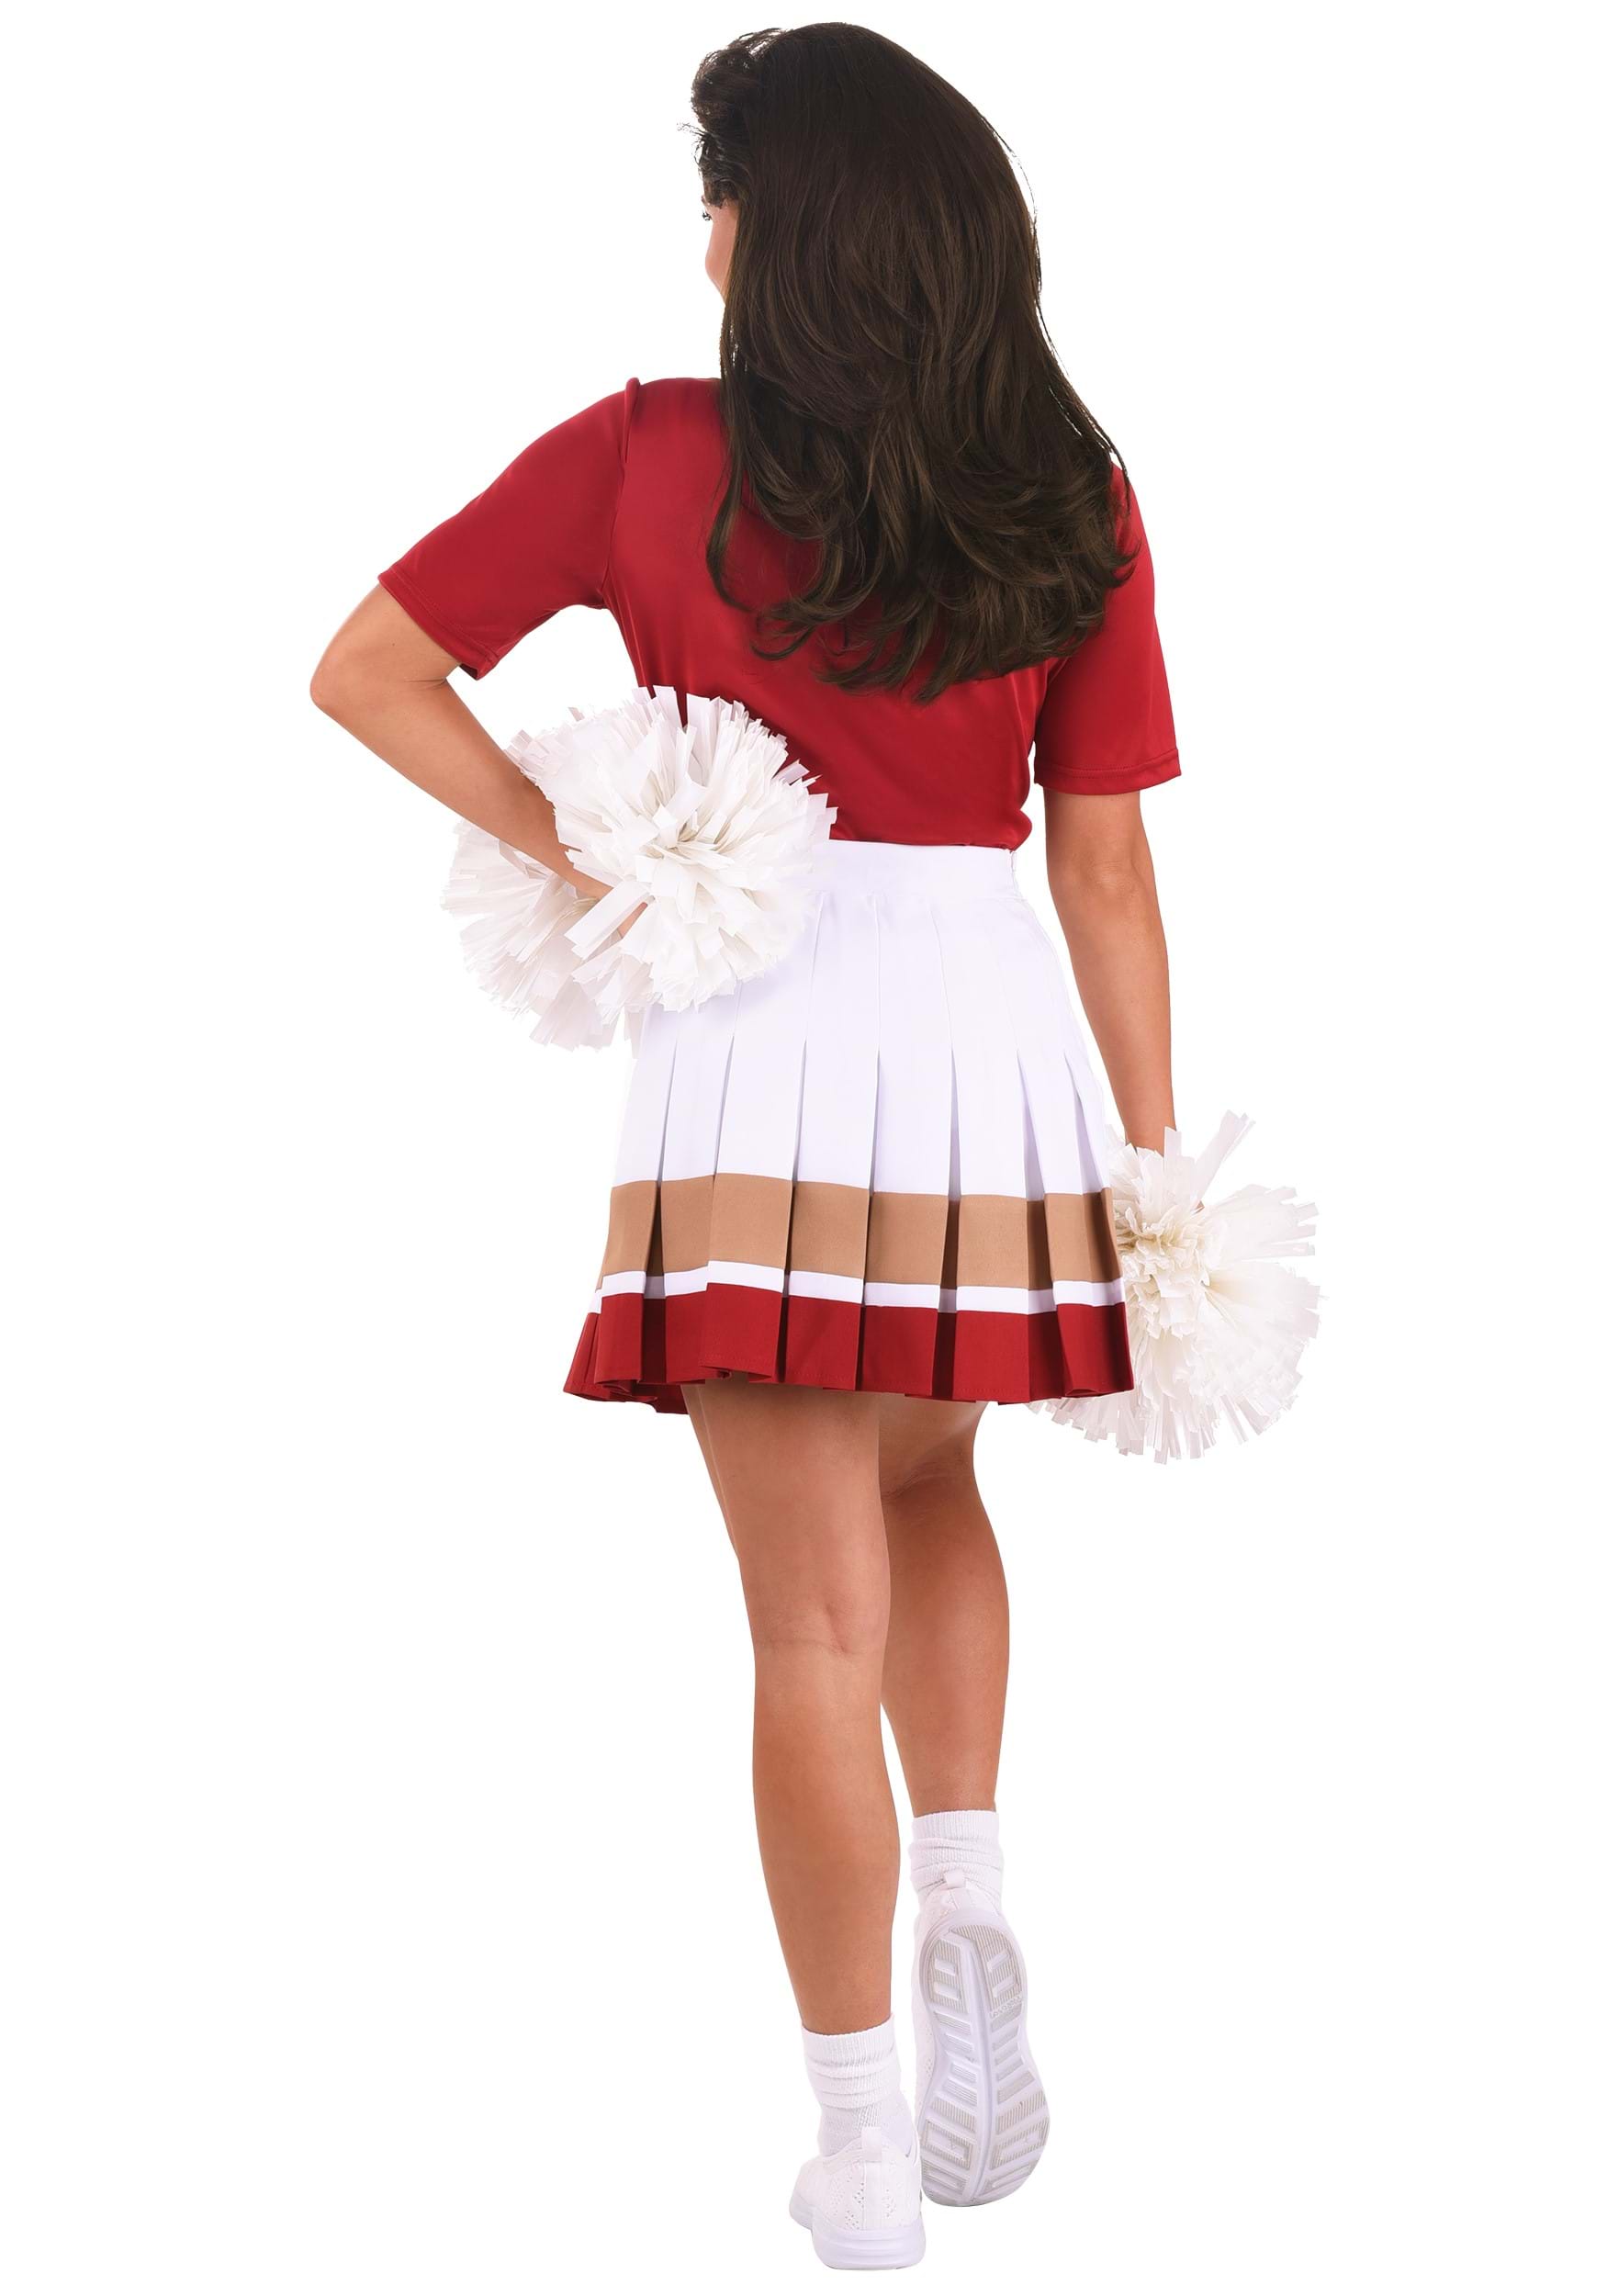 Saved By The Bell Cheerleader Women's Fancy Dress Costume